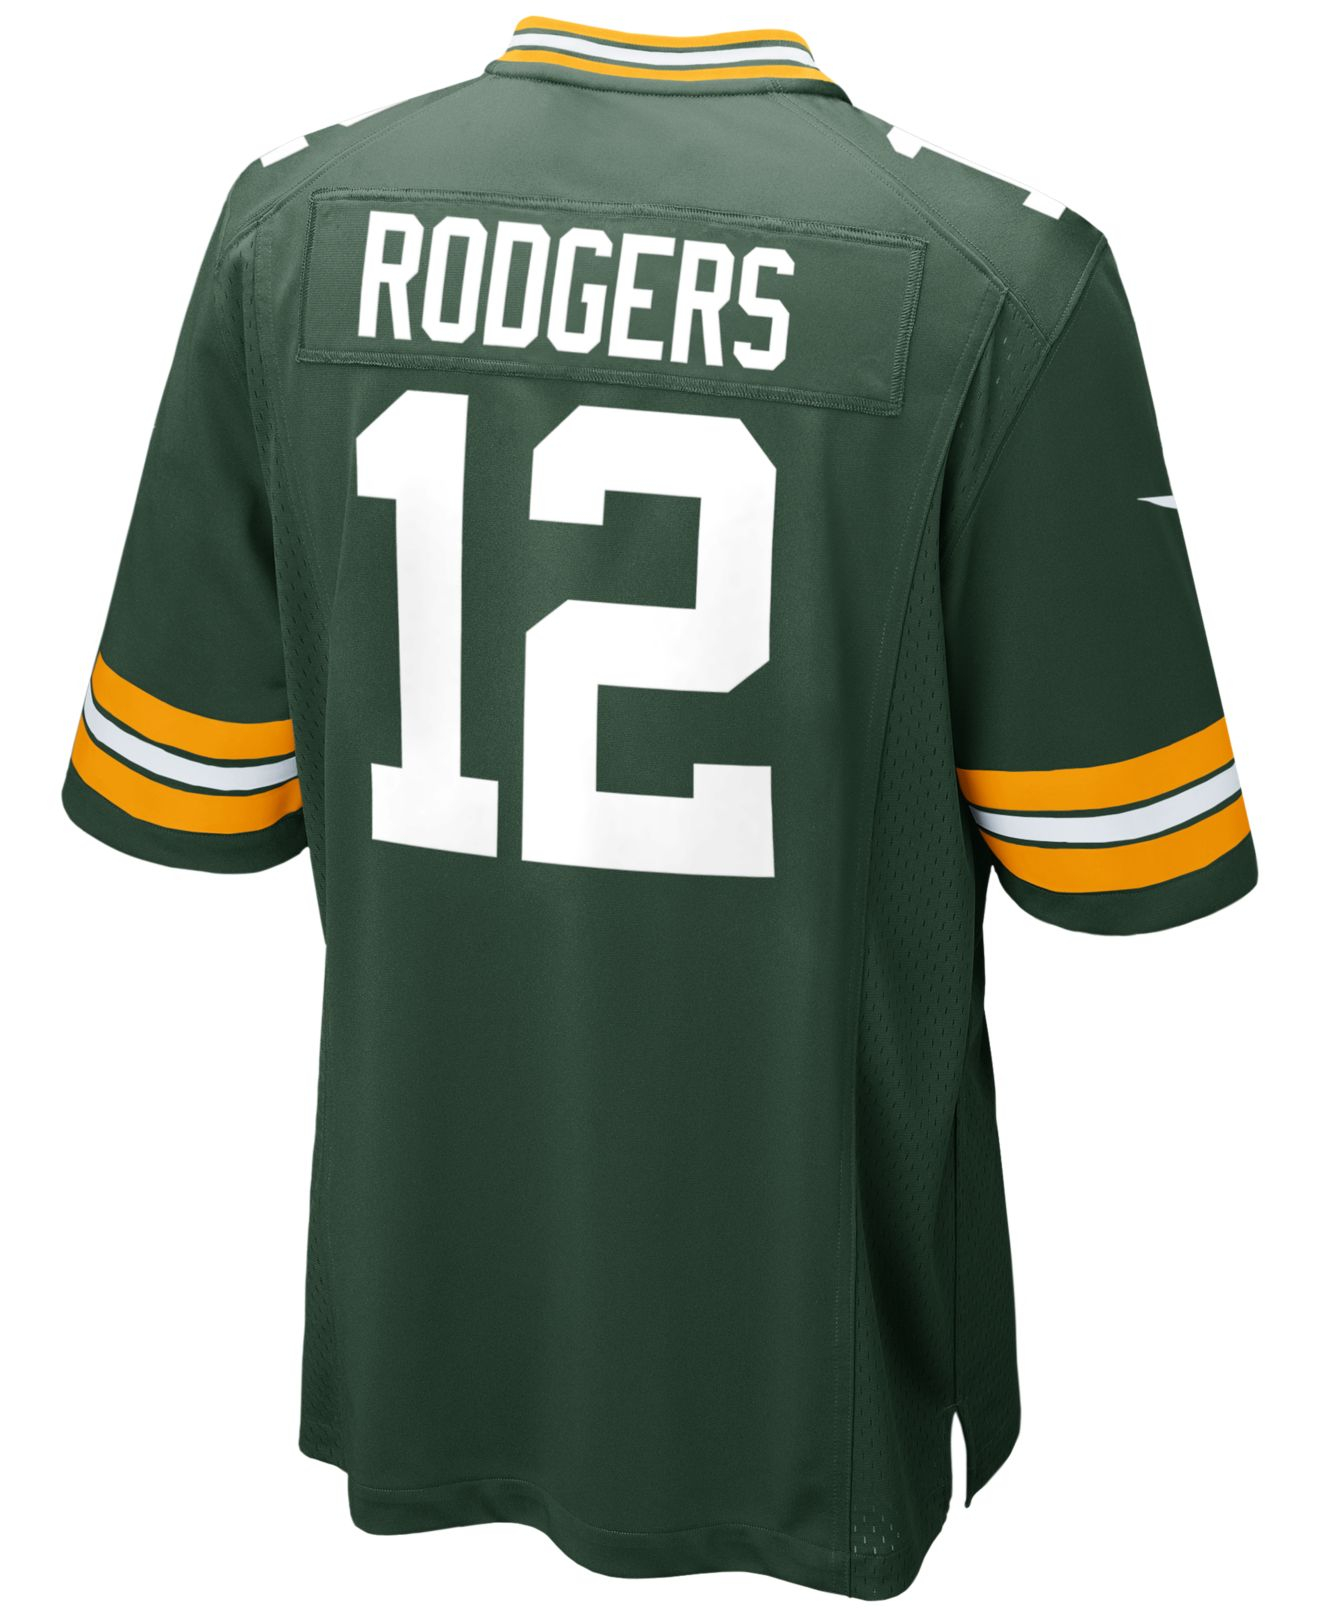 Nike Men's Aaron Rodgers Green Bay Packers Game Jersey in Green for Men   Lyst